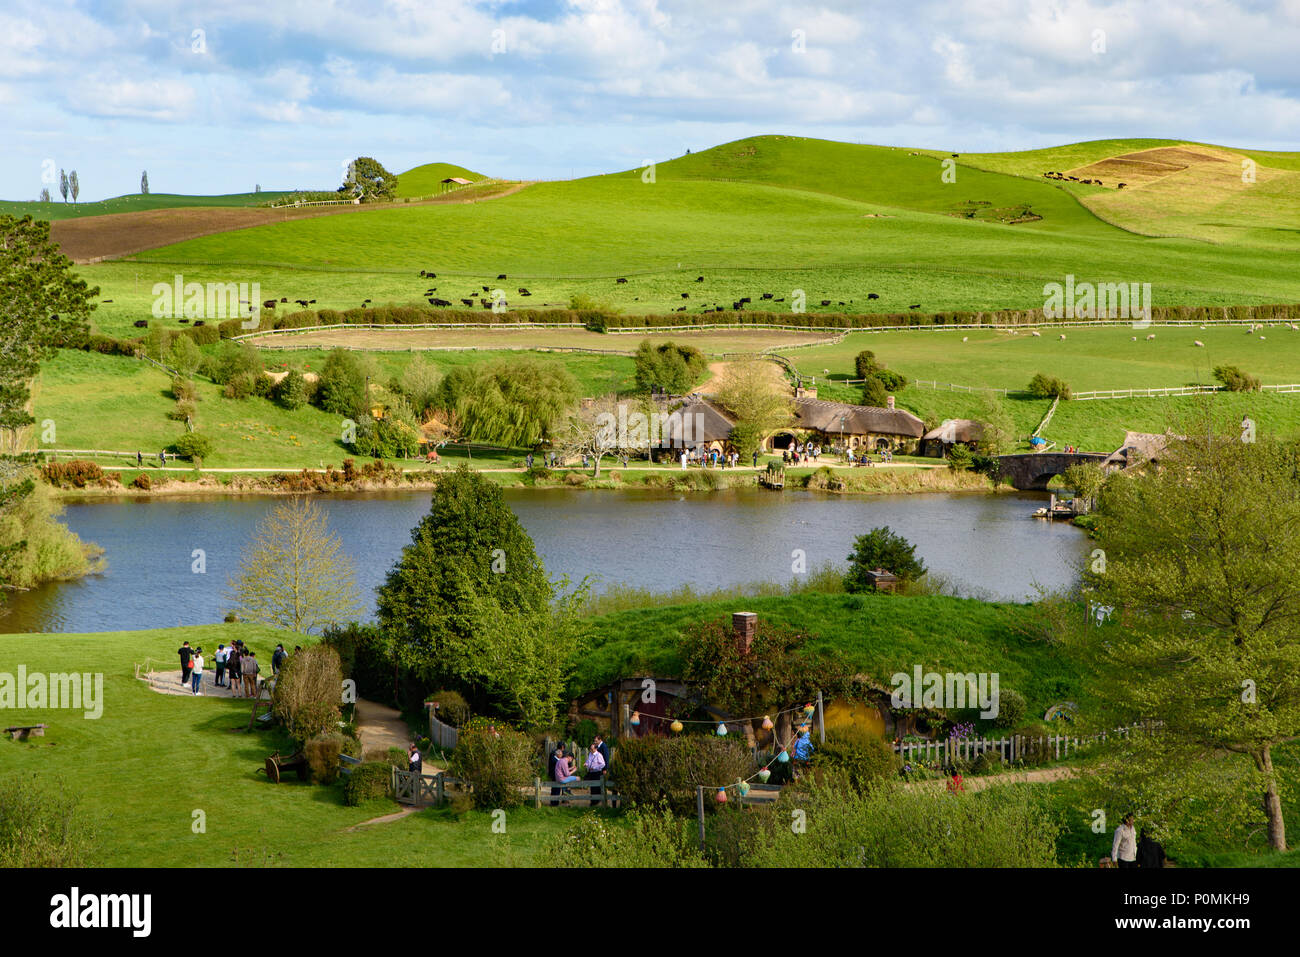 Hobbiton Movie Set of Shire in The Lord of the Rings and The Hobbit trilogies, Matamata, New Zealand Stock Photo